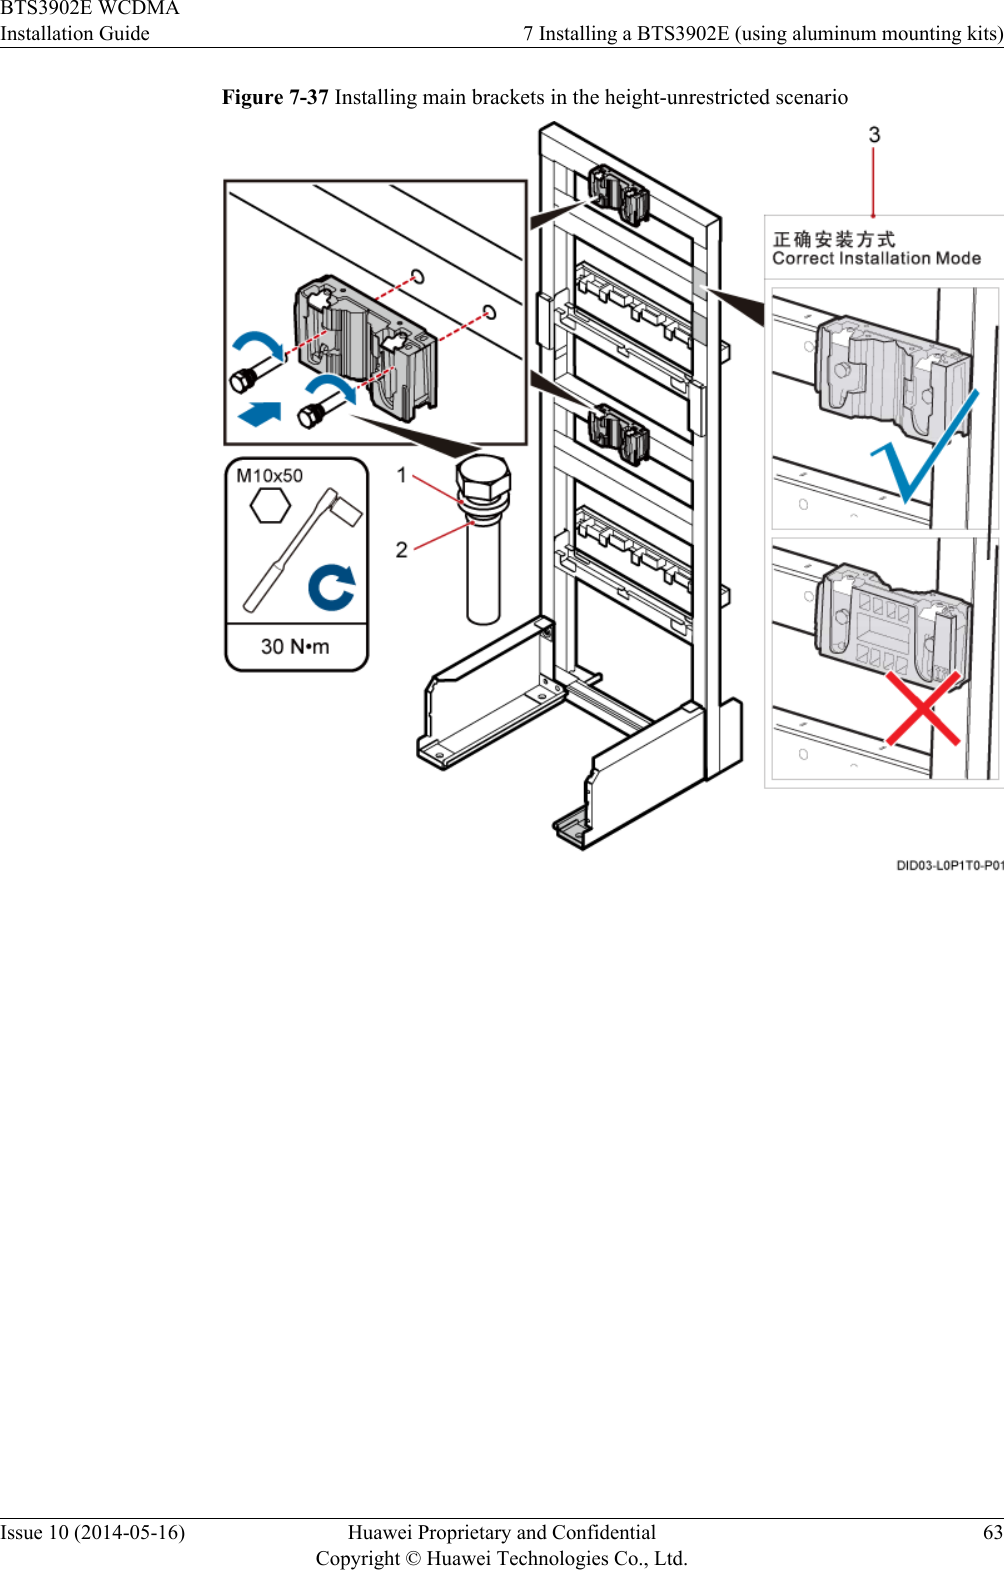 Figure 7-37 Installing main brackets in the height-unrestricted scenarioBTS3902E WCDMAInstallation Guide 7 Installing a BTS3902E (using aluminum mounting kits)Issue 10 (2014-05-16) Huawei Proprietary and ConfidentialCopyright © Huawei Technologies Co., Ltd.63